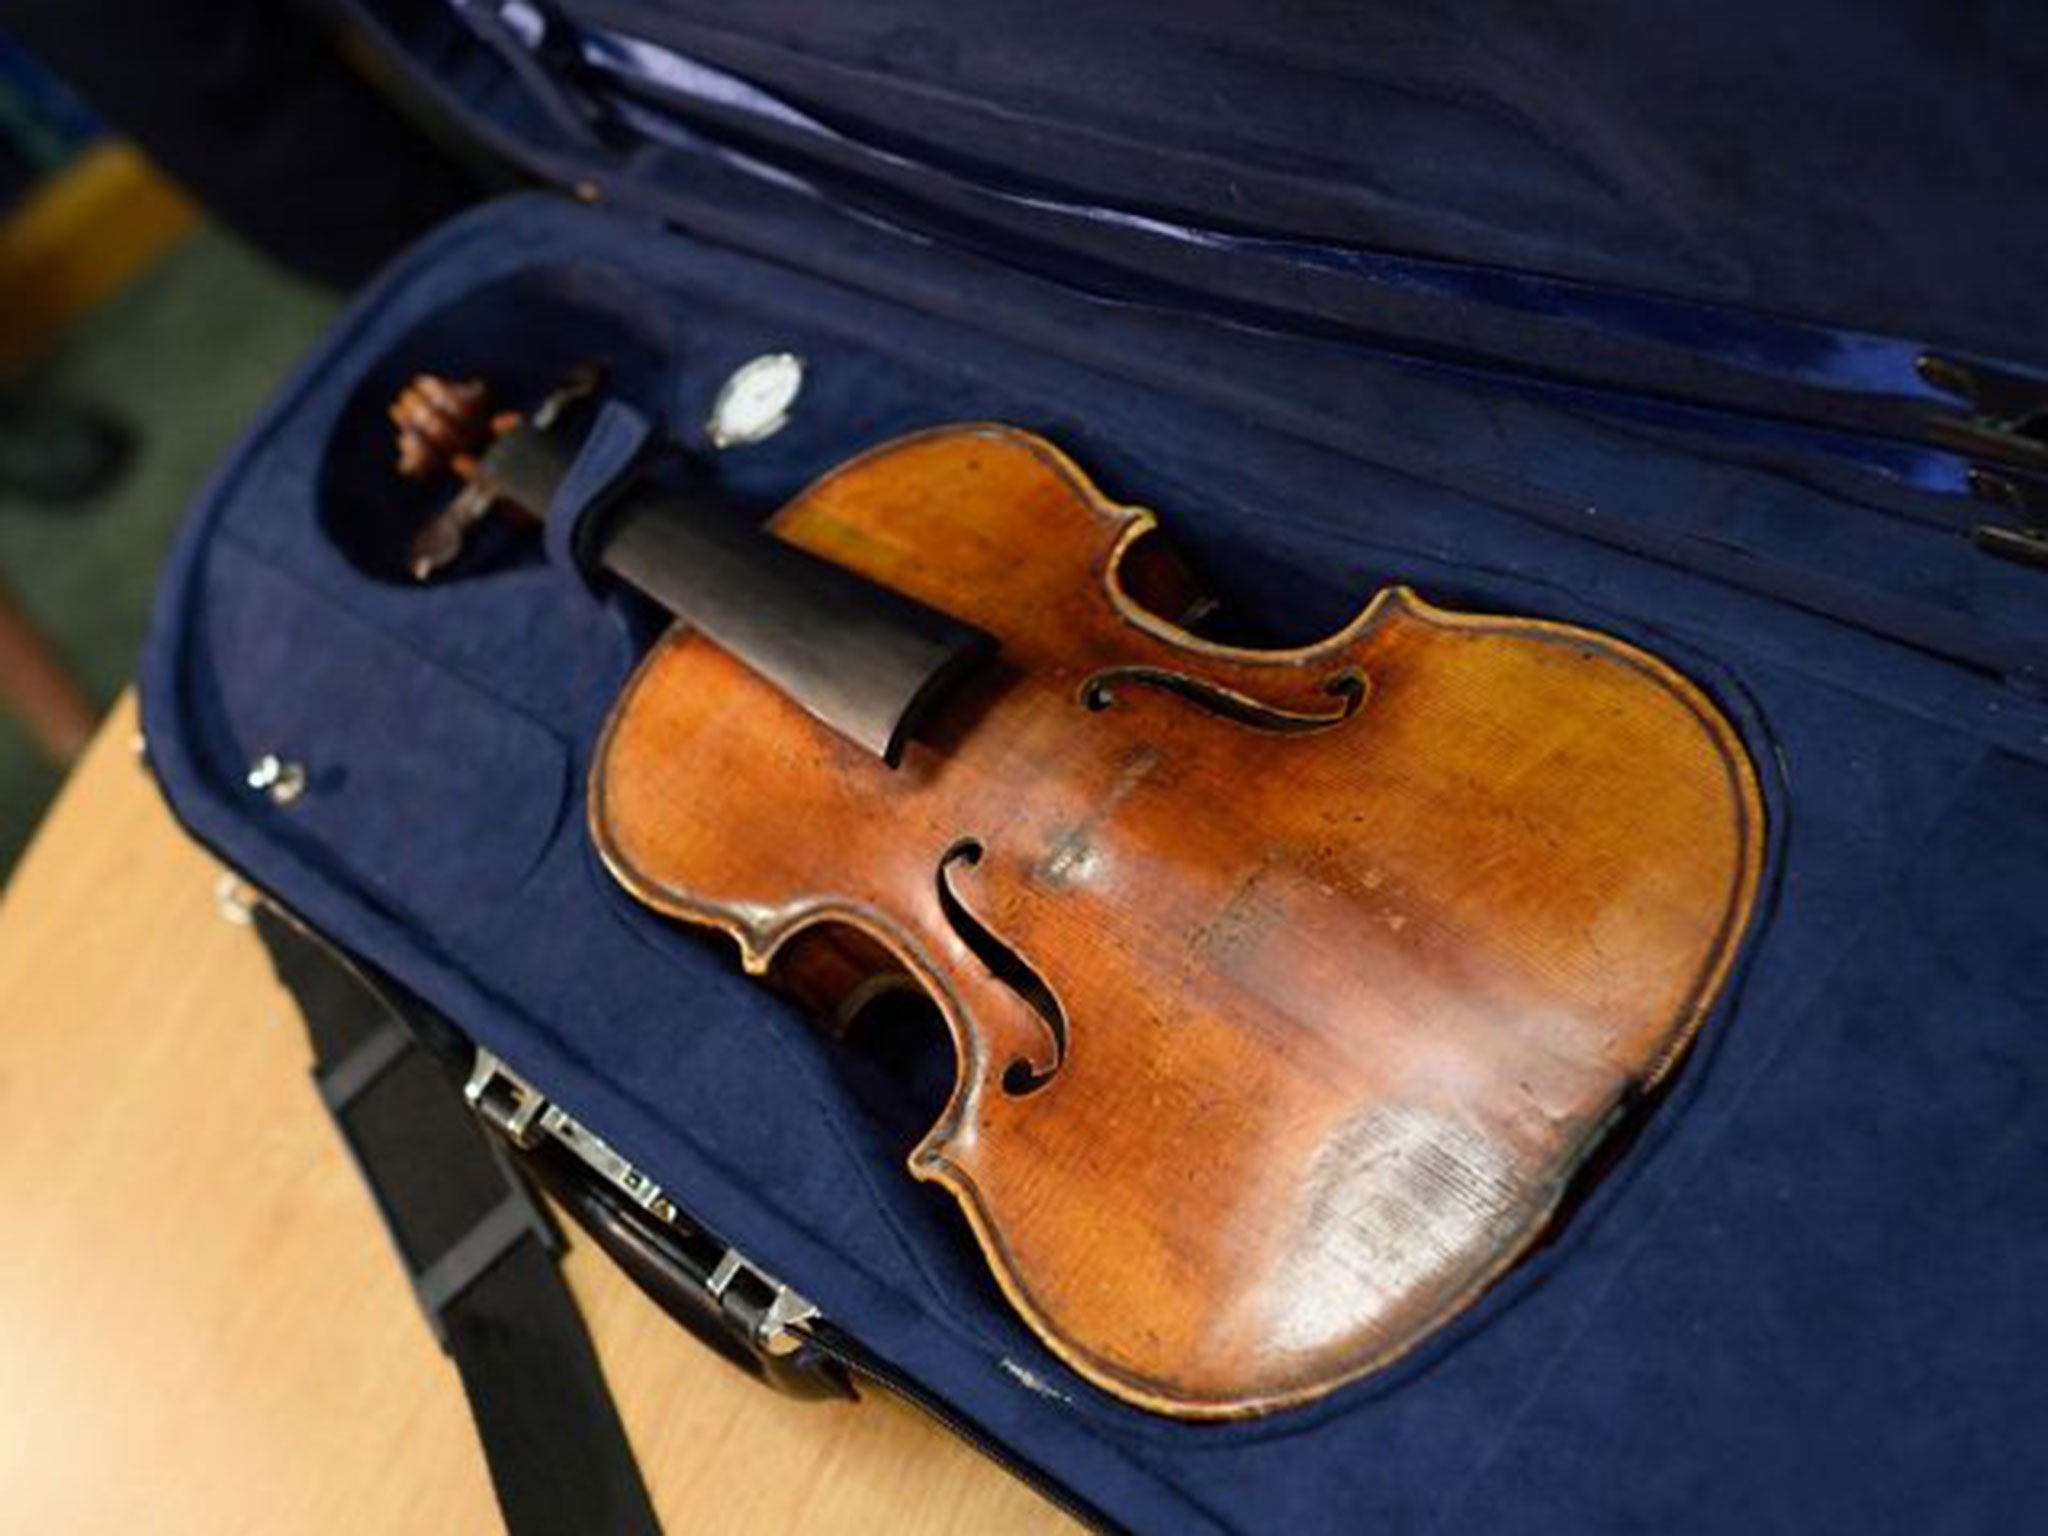 The stolen Stradivarius violin belonging to the late renowned violinist Roman Totenberg is displayed at a news conference August 6, 2015 in New York.